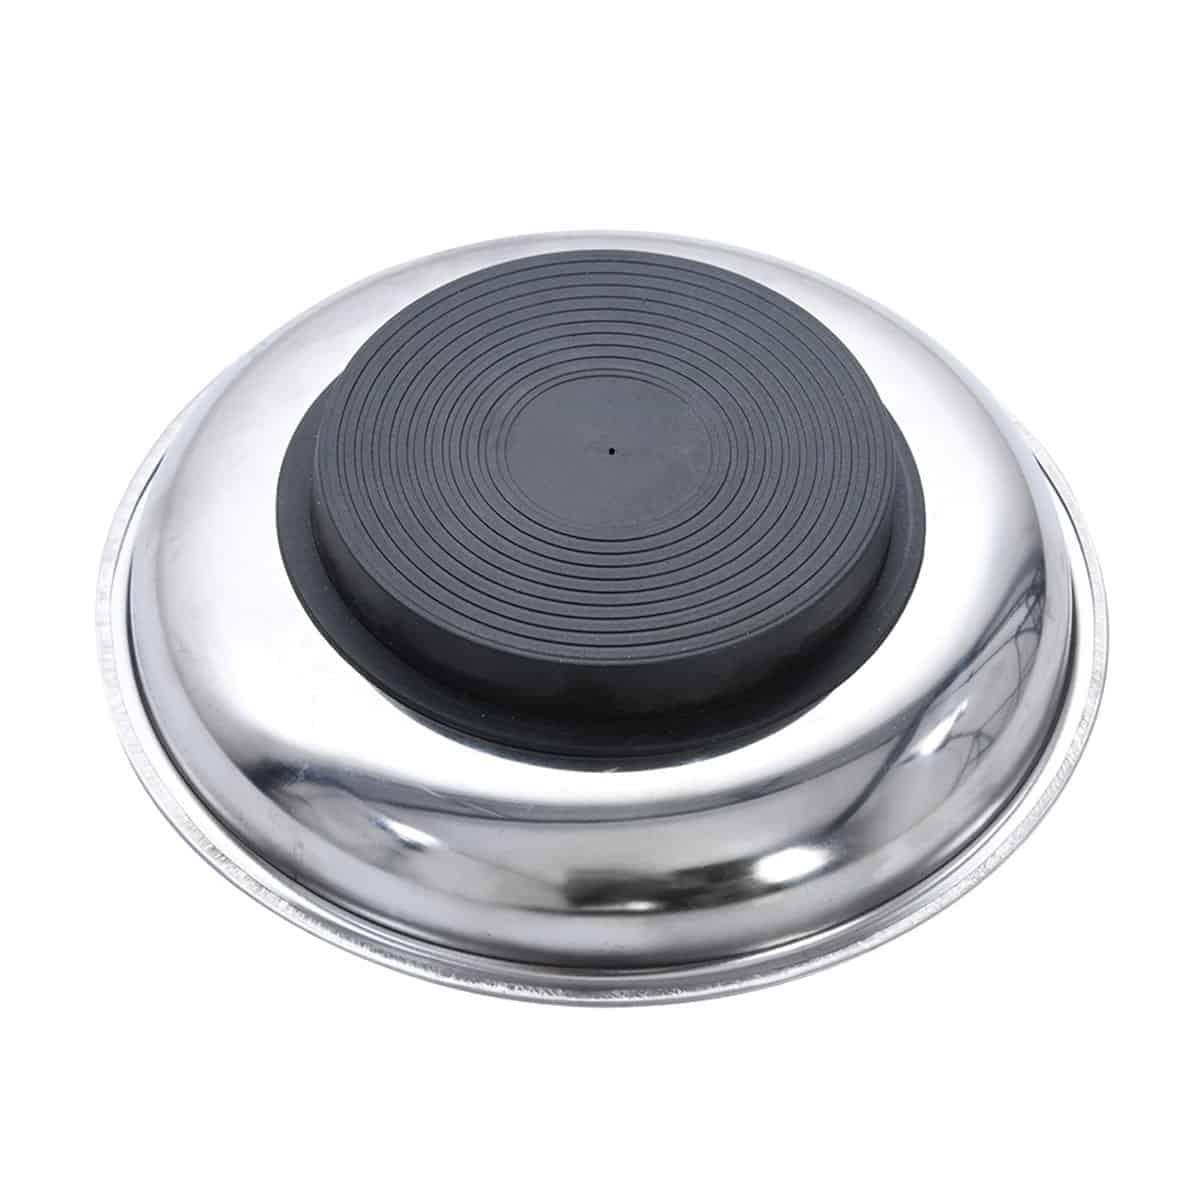 Oxford Magneto Magnetic Workshop Tray - 15cms - Browse our range of Care: Tools - getgearedshop 